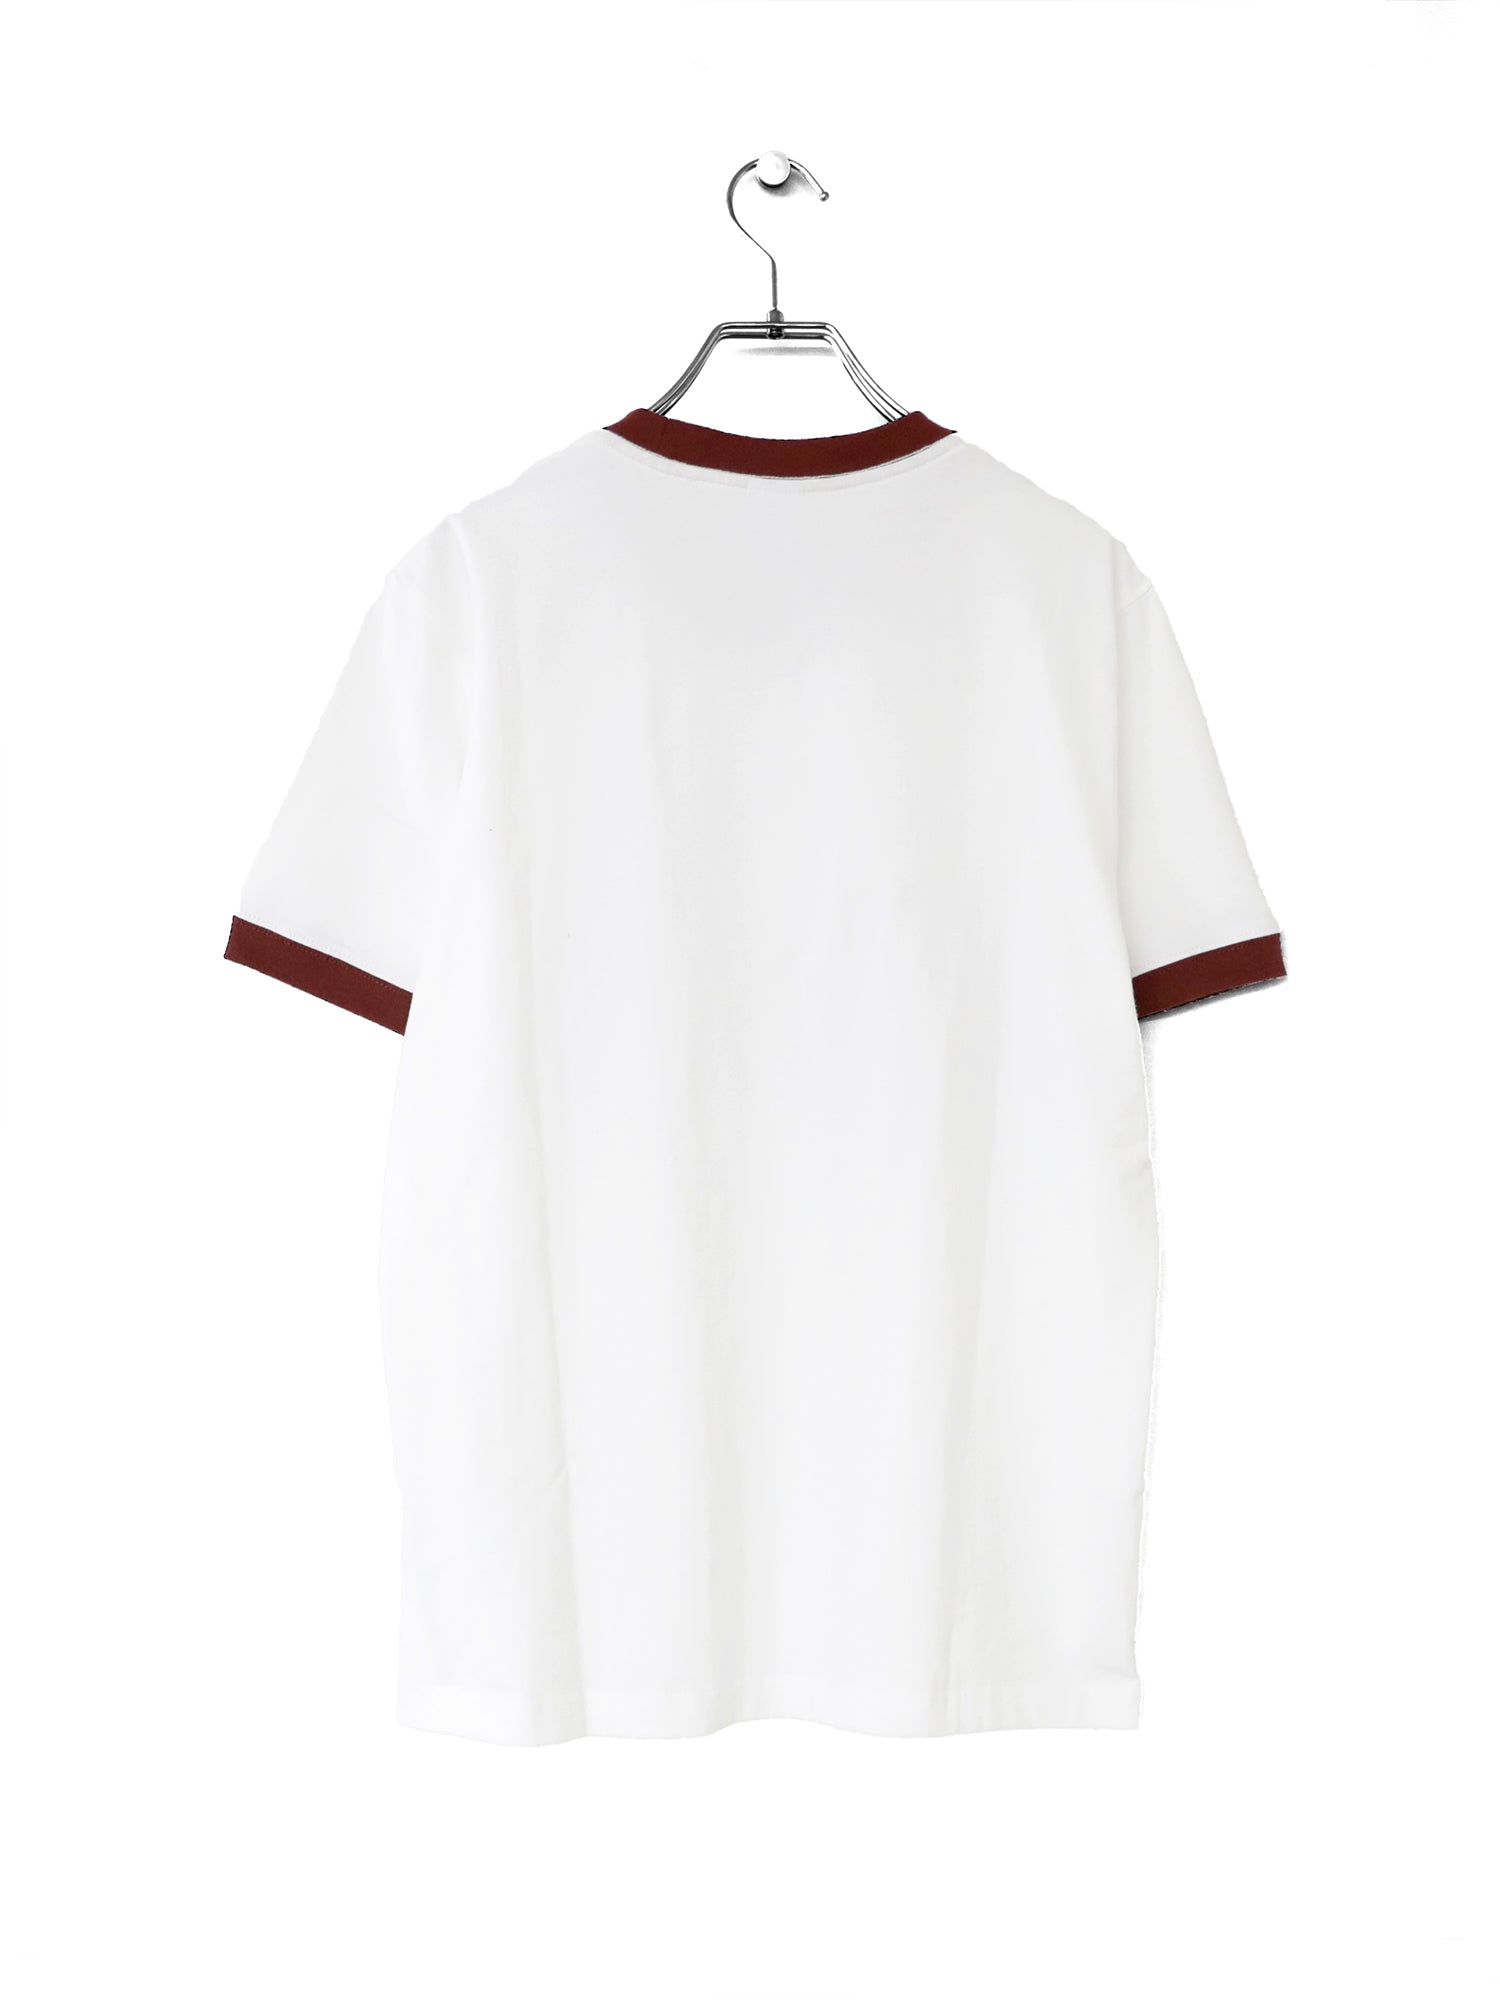 AFS "BERRY" 9.5oz RINGER TEE